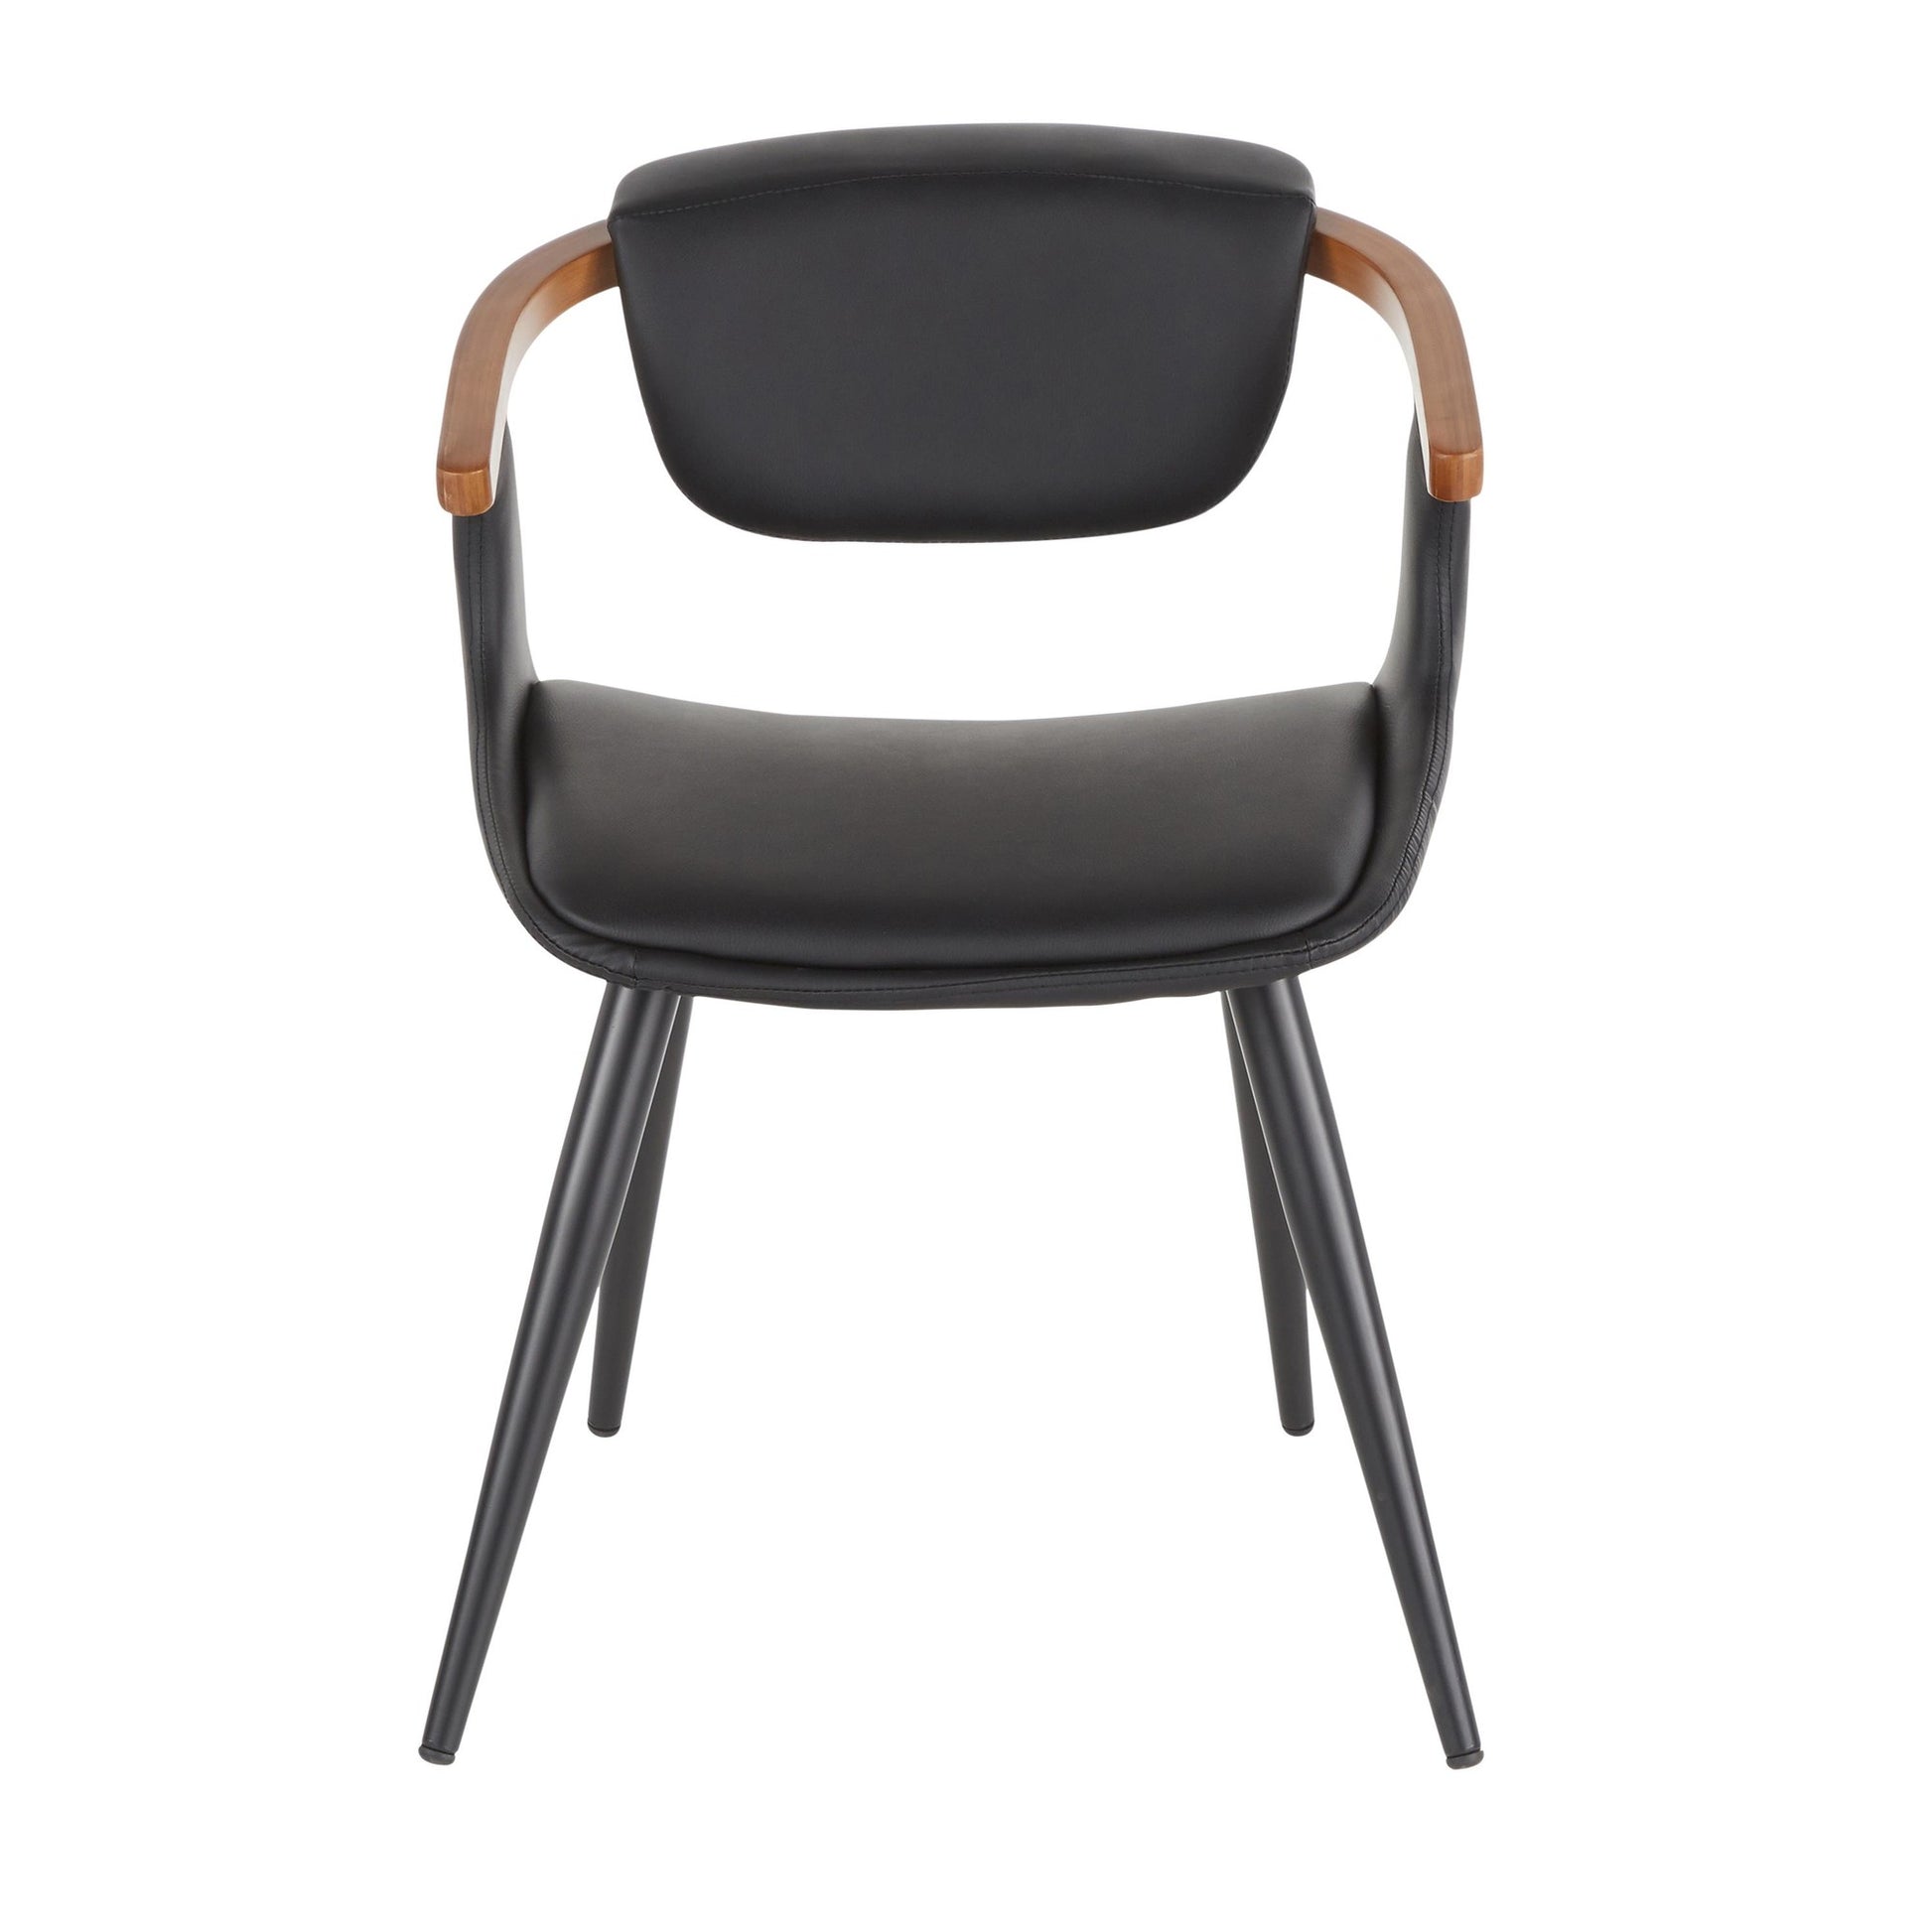 LumiSource Oracle Chair-4